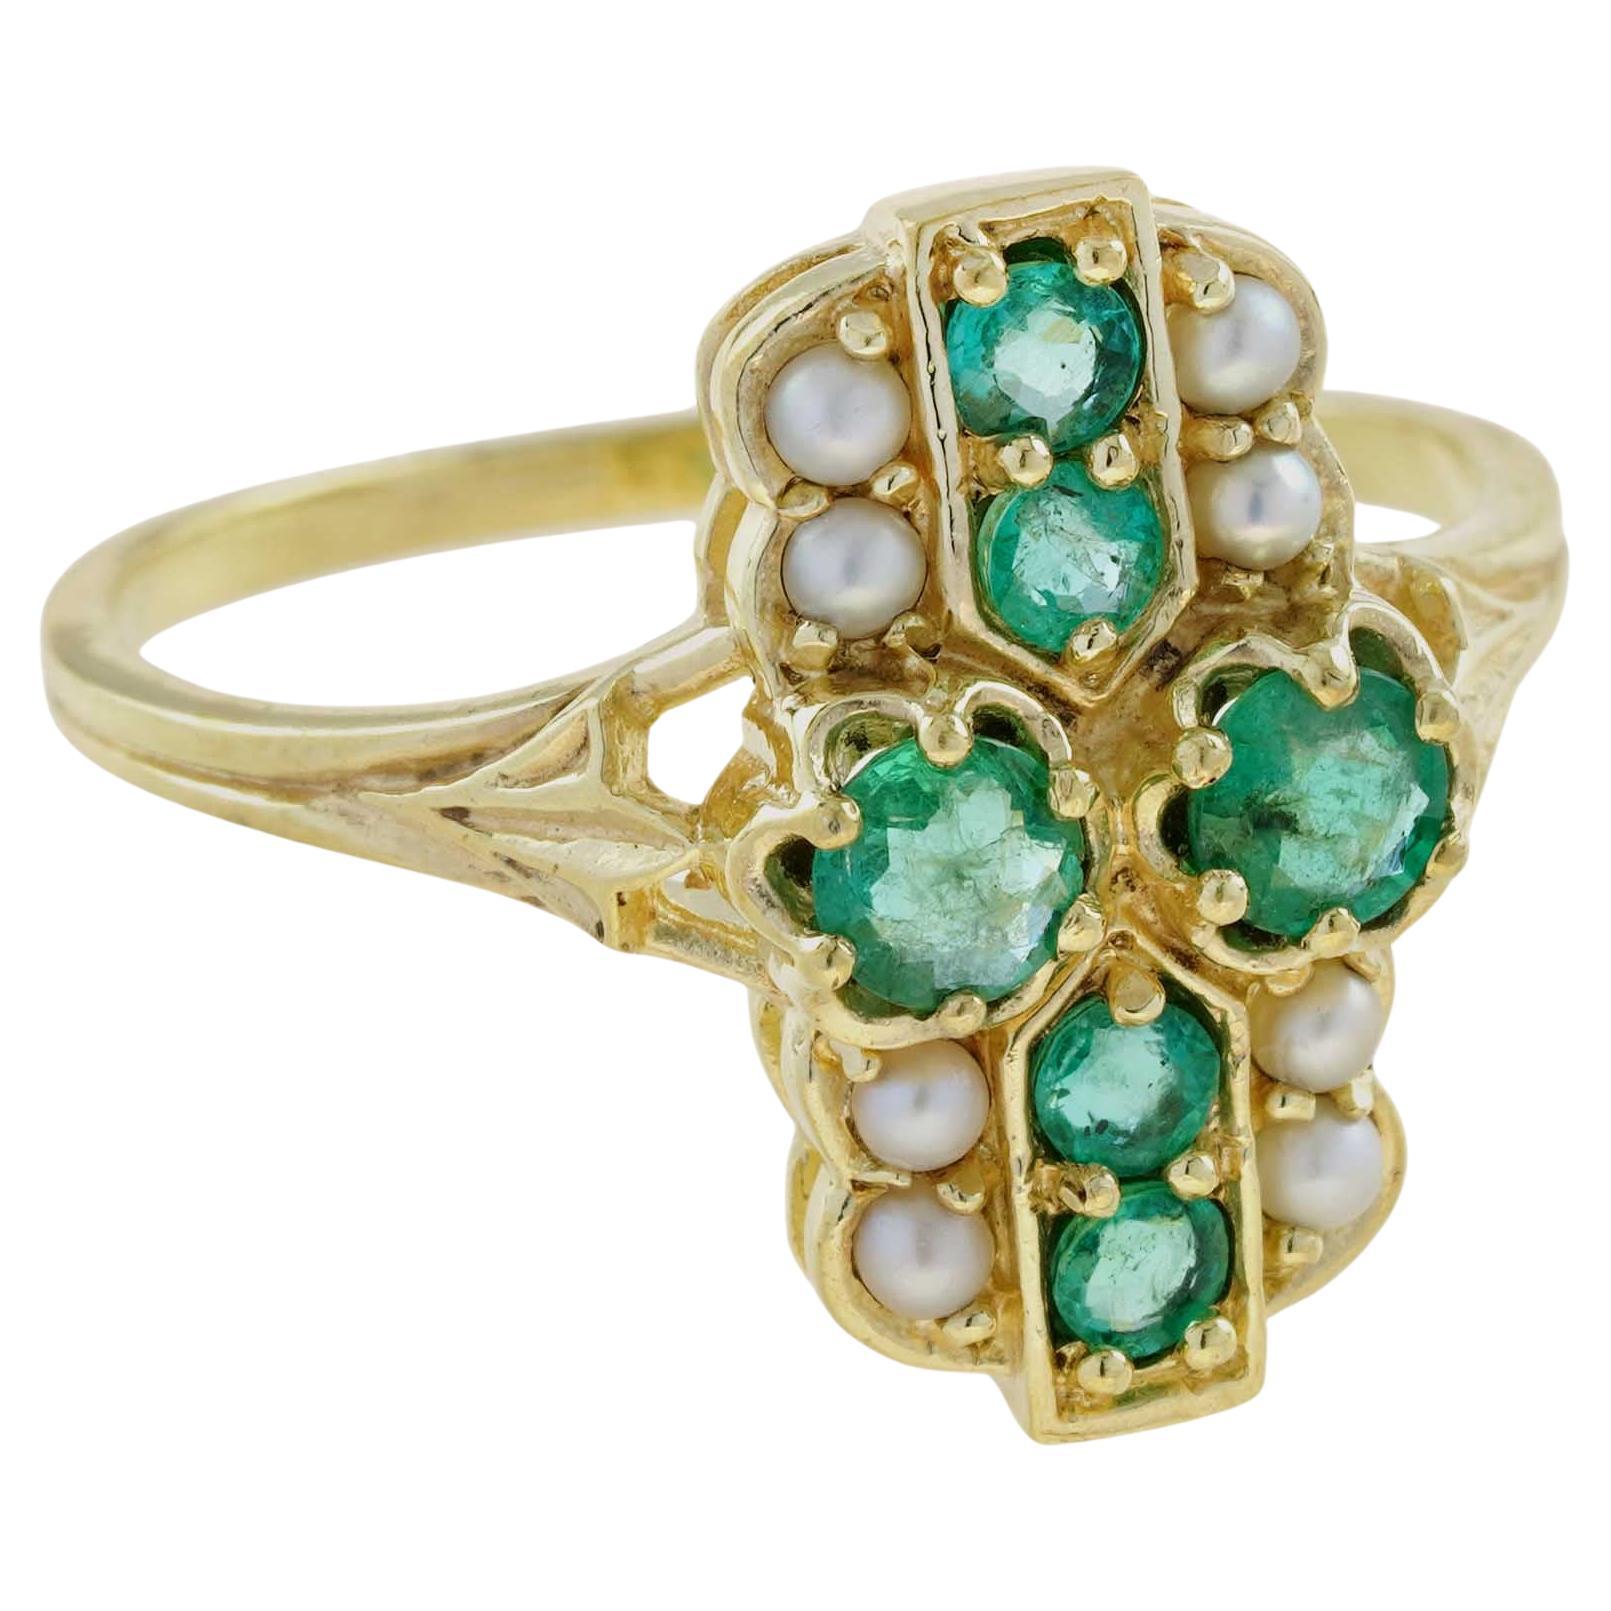 For Sale:  Natural Emerald and Pearl Vintage Style Ring in Solid 9K Gold